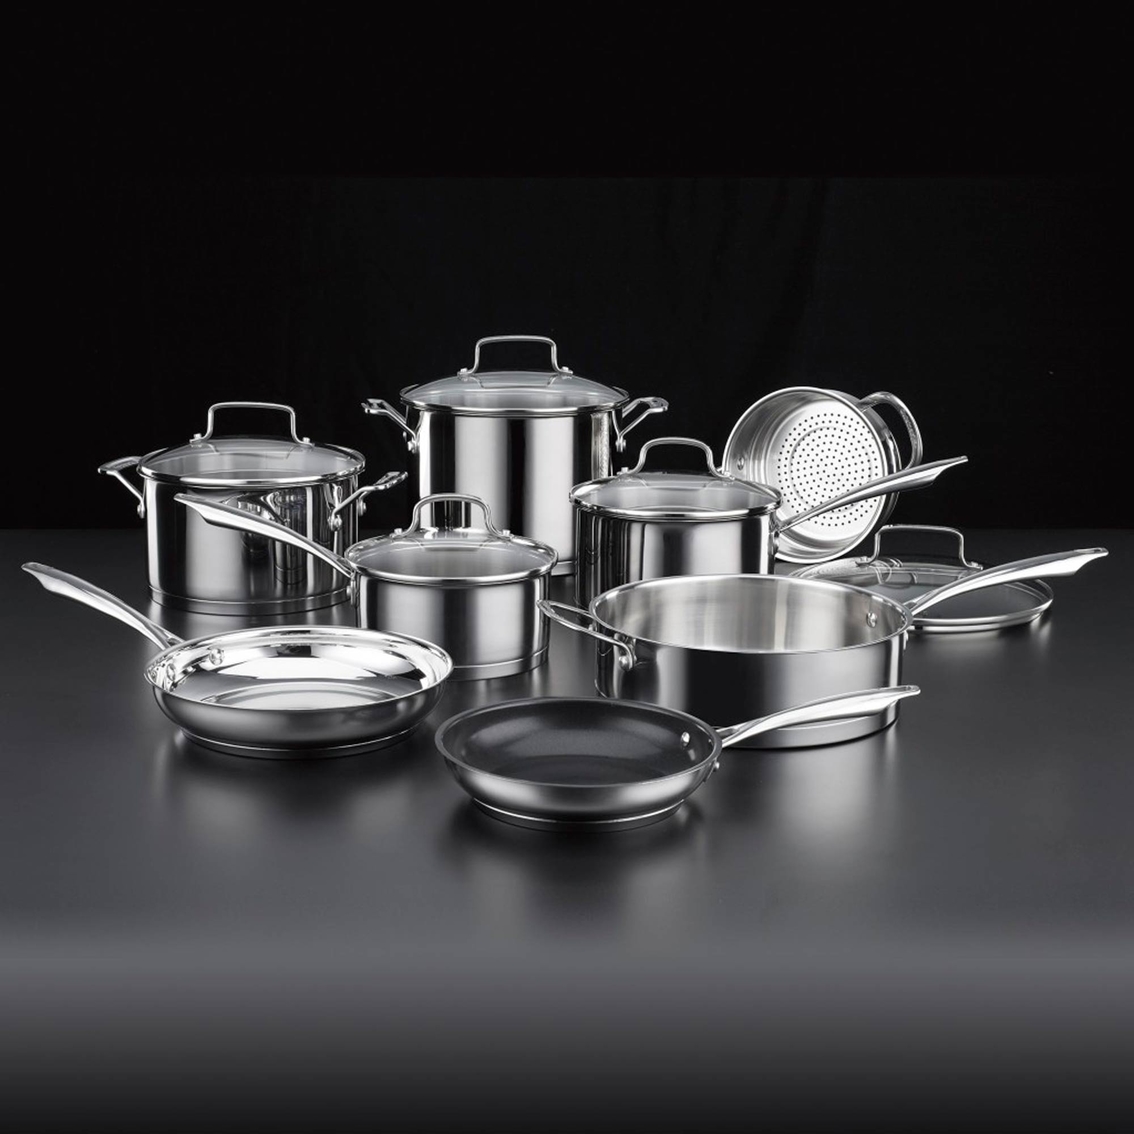 Cuisinart Professional Series Stainless Steel 13 pc. Cookware Set - Image 2 of 2